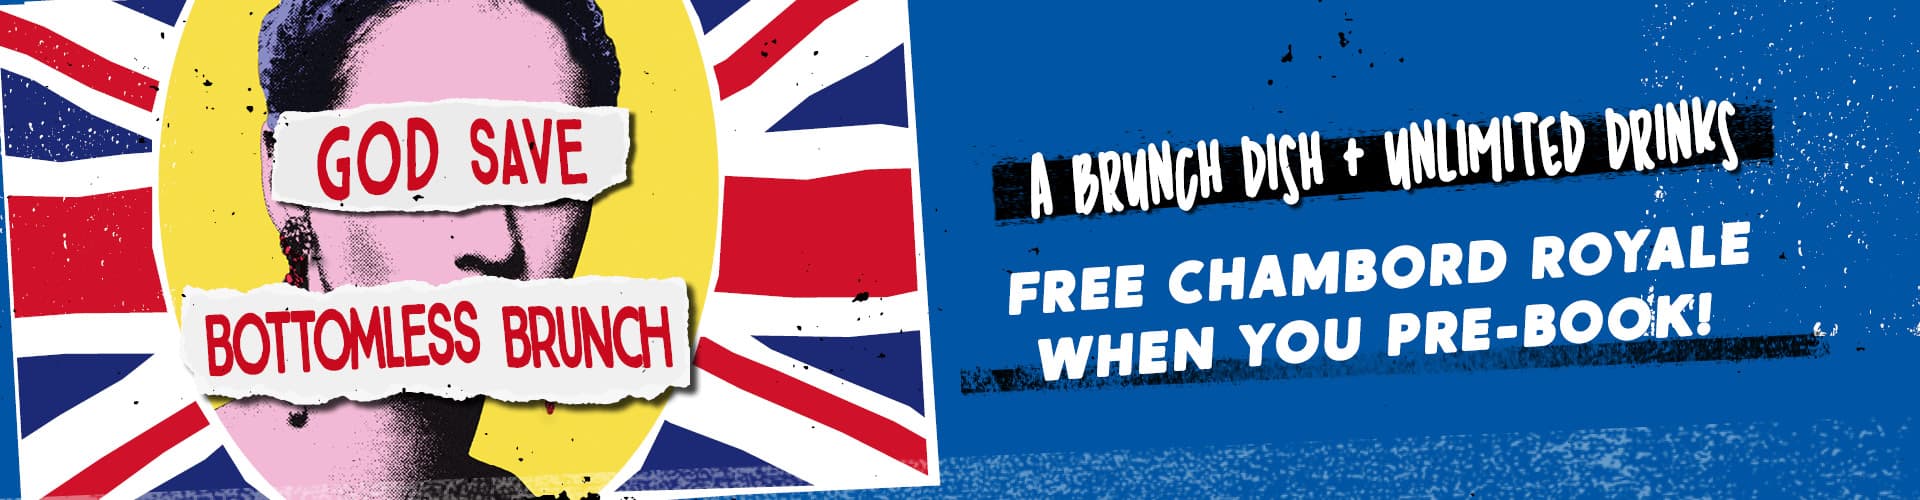 God Save Bottomless Brunch - Brunch Dish and Unlimited Drinks, Free Chambord Royale